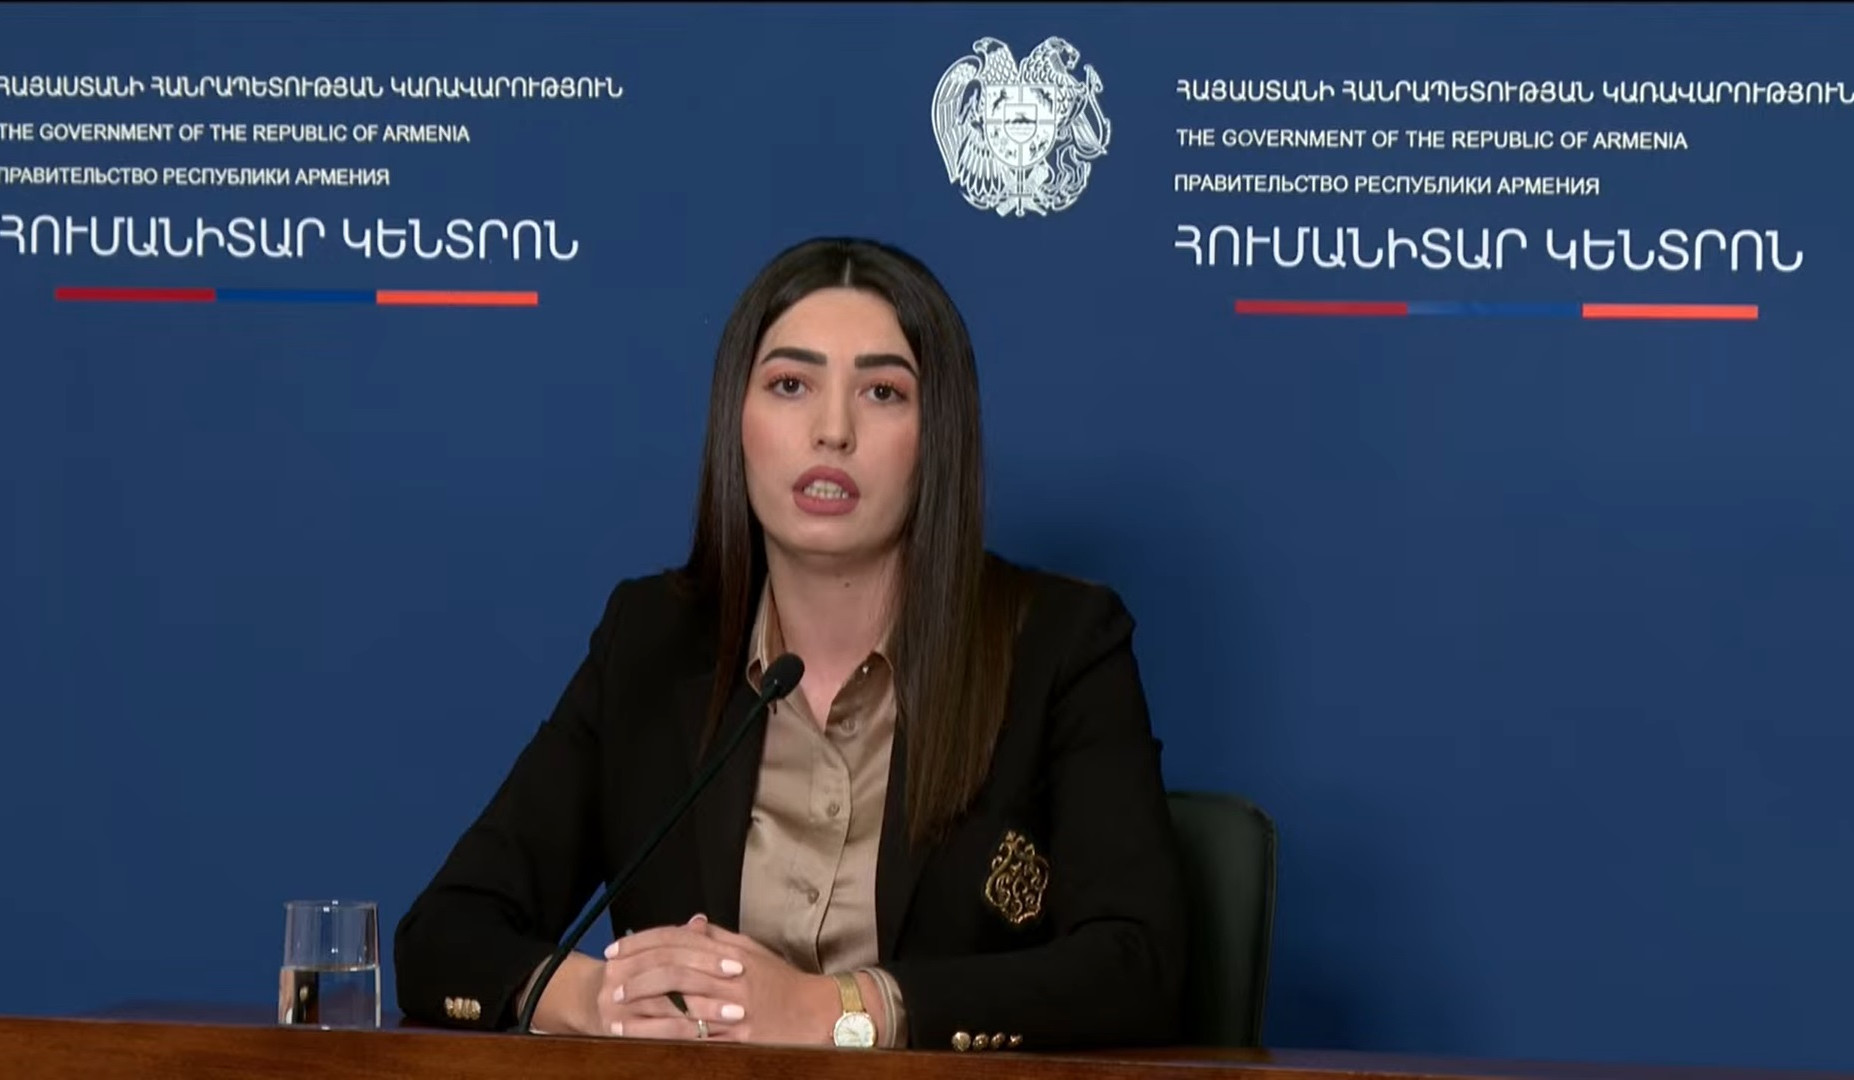 Temporary protection status of those forcibly displaced from Nagorno-Karabakh is automatic: Deputy Minister of Internal Affairs